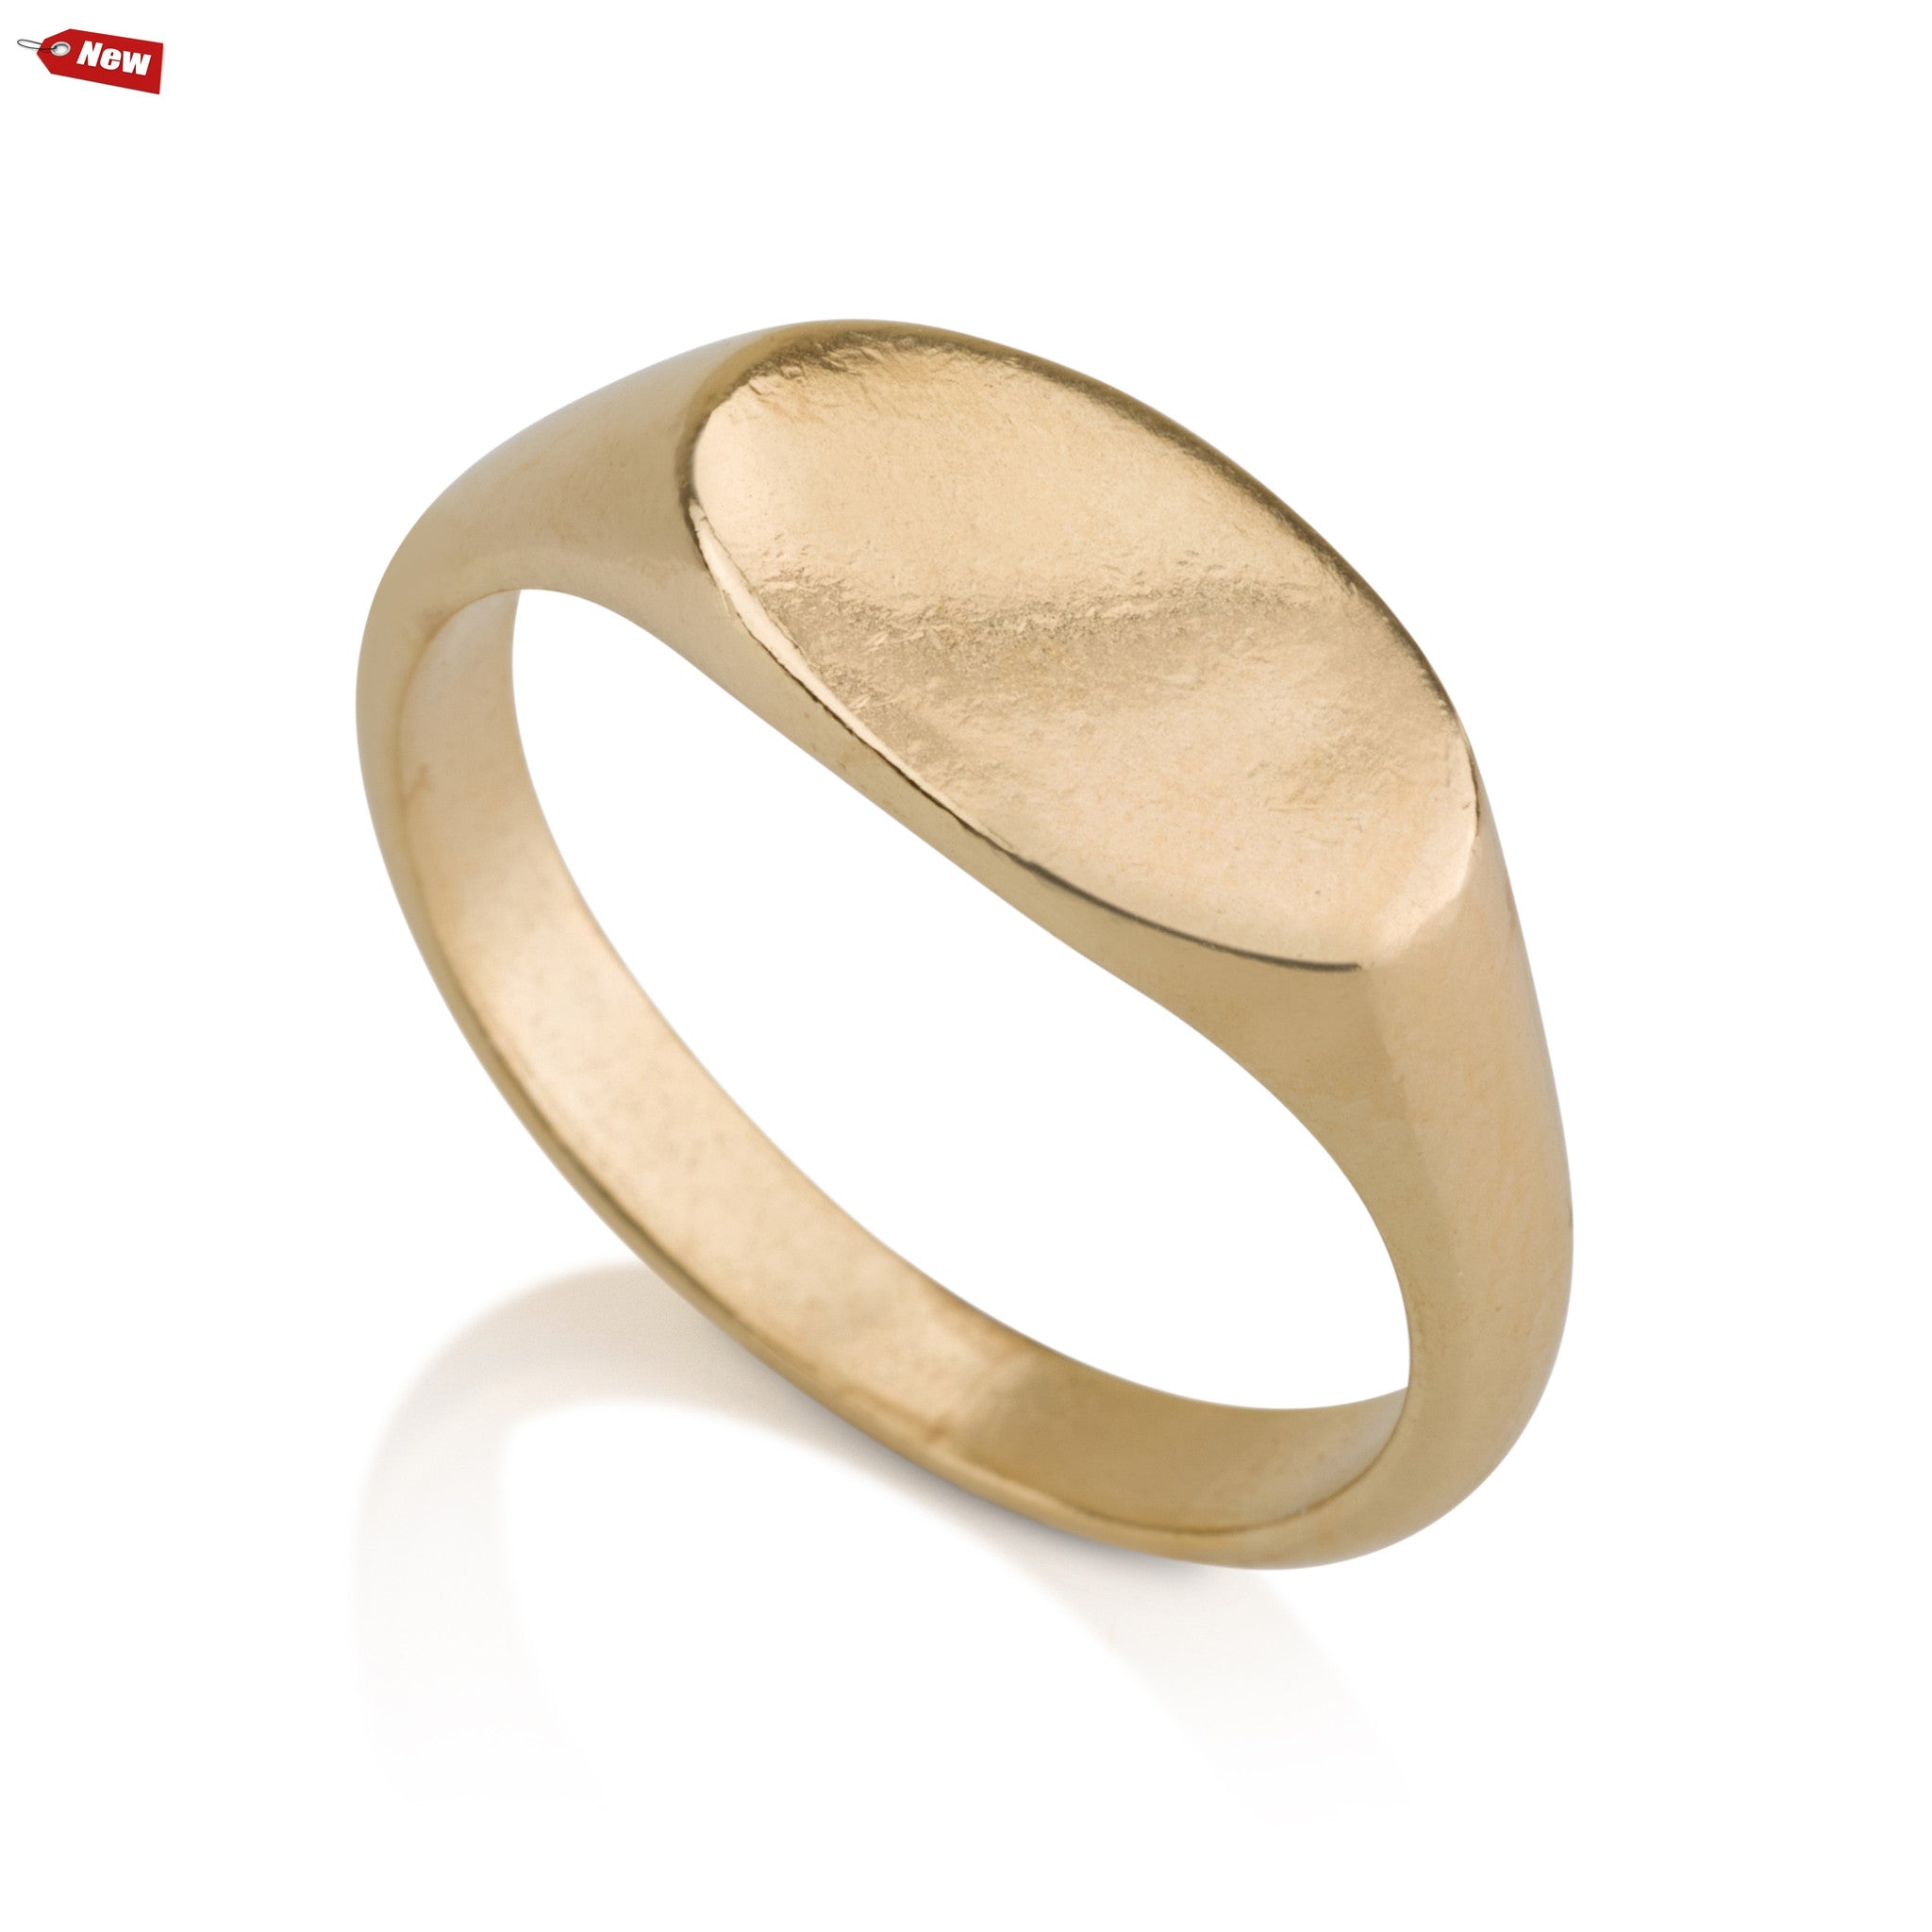 Rings - Oval Signet Ring